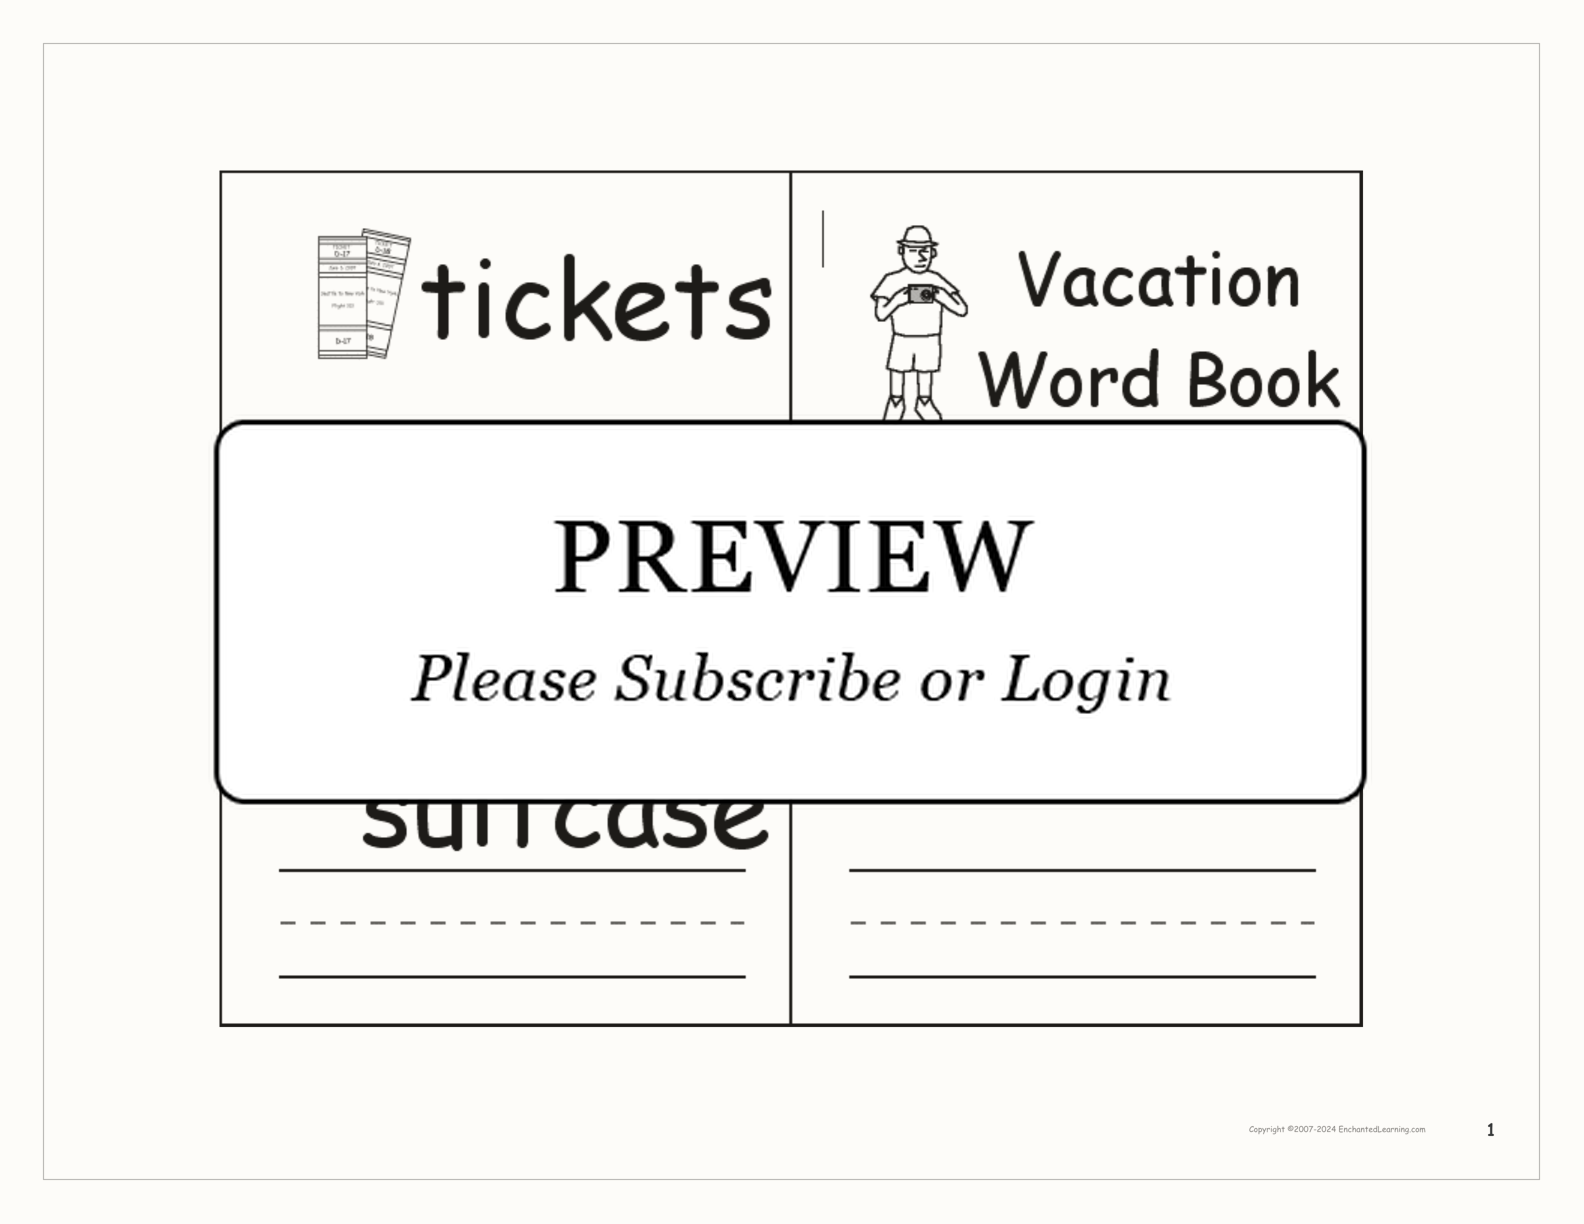 Vacation Word Book interactive printout page 1